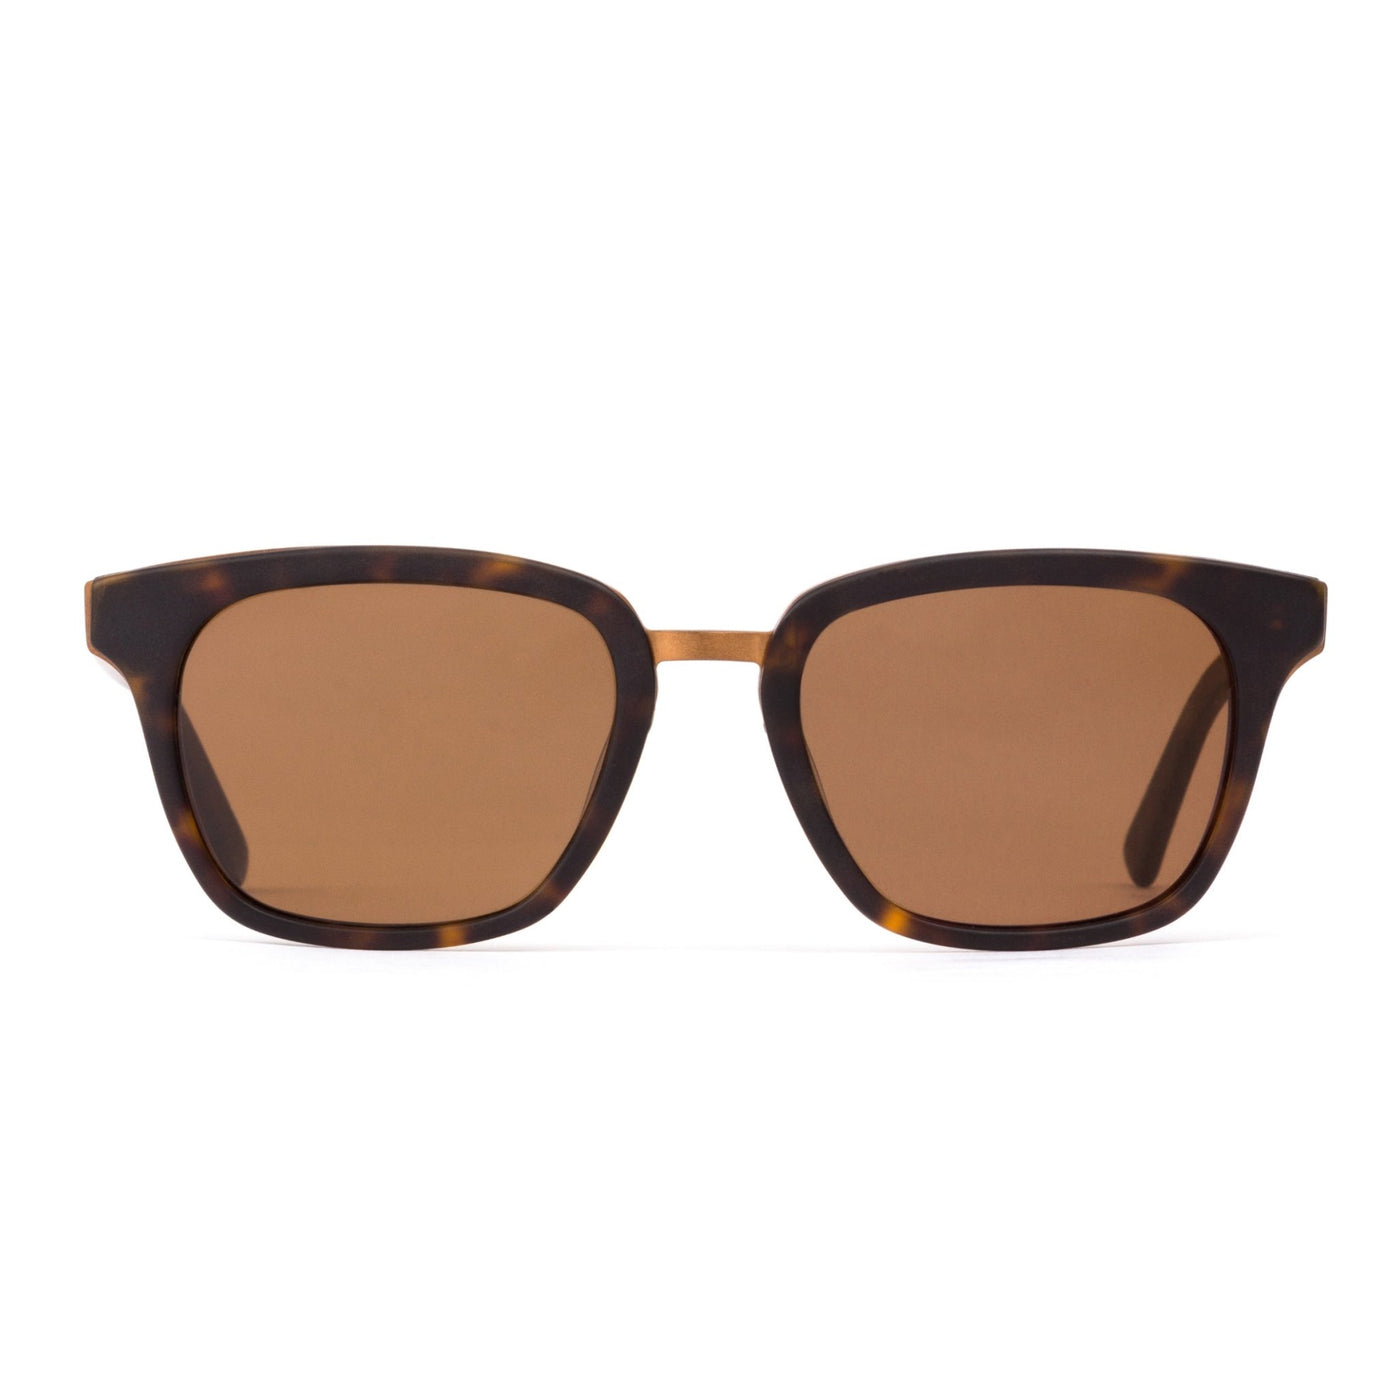 Brown and gold OTIS Eyewear sunglasses from the front